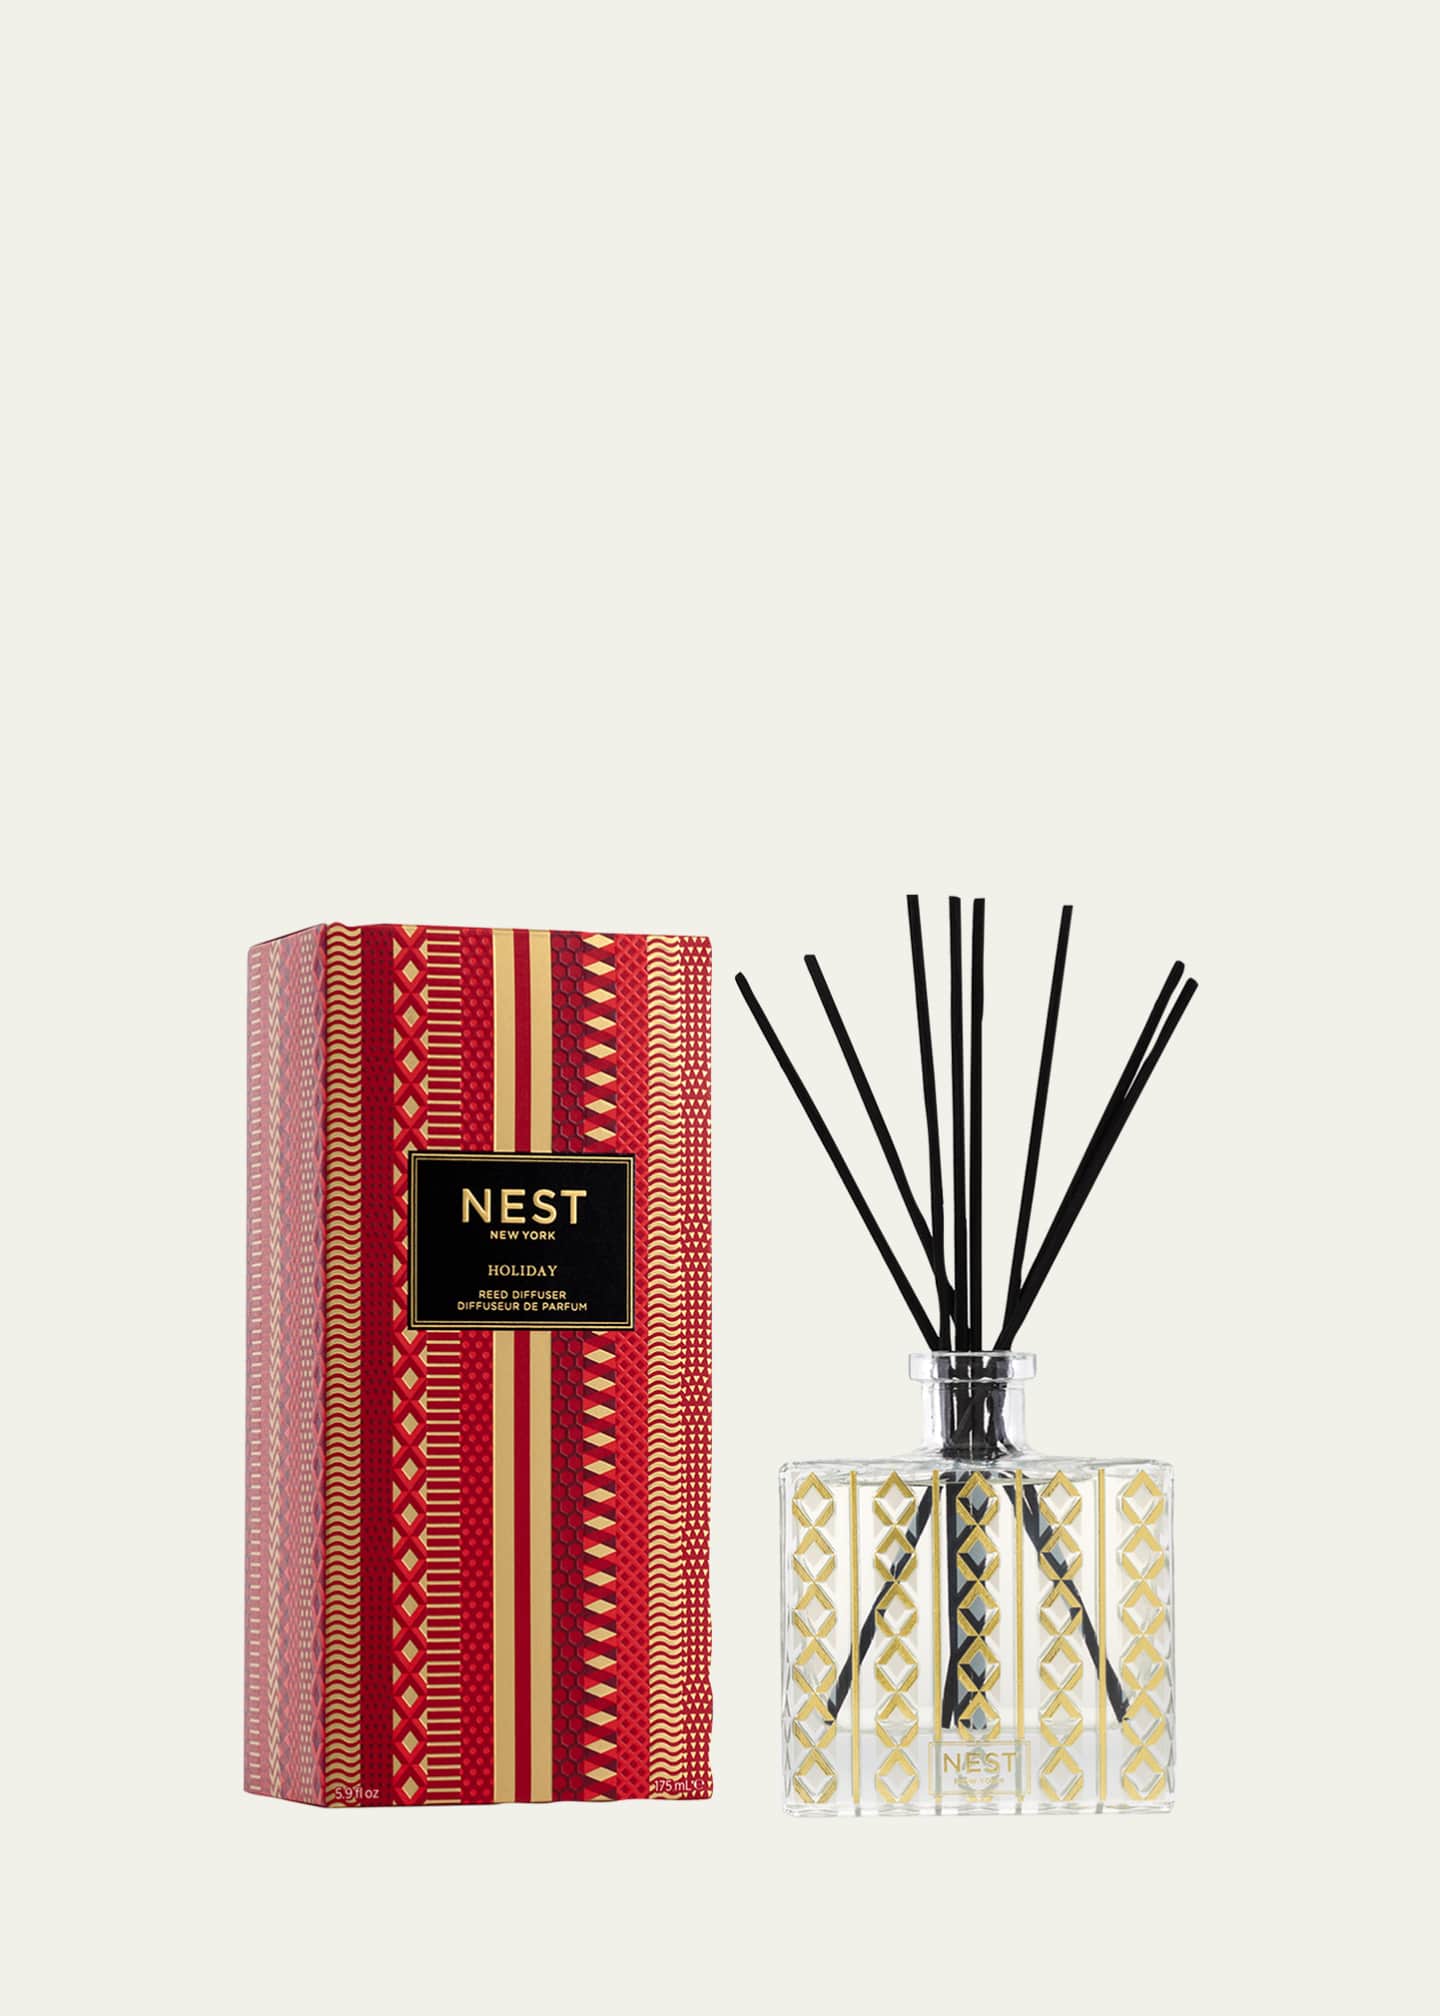 NEST New York 6 oz. Holiday Reed Diffuser Image 1 of 5